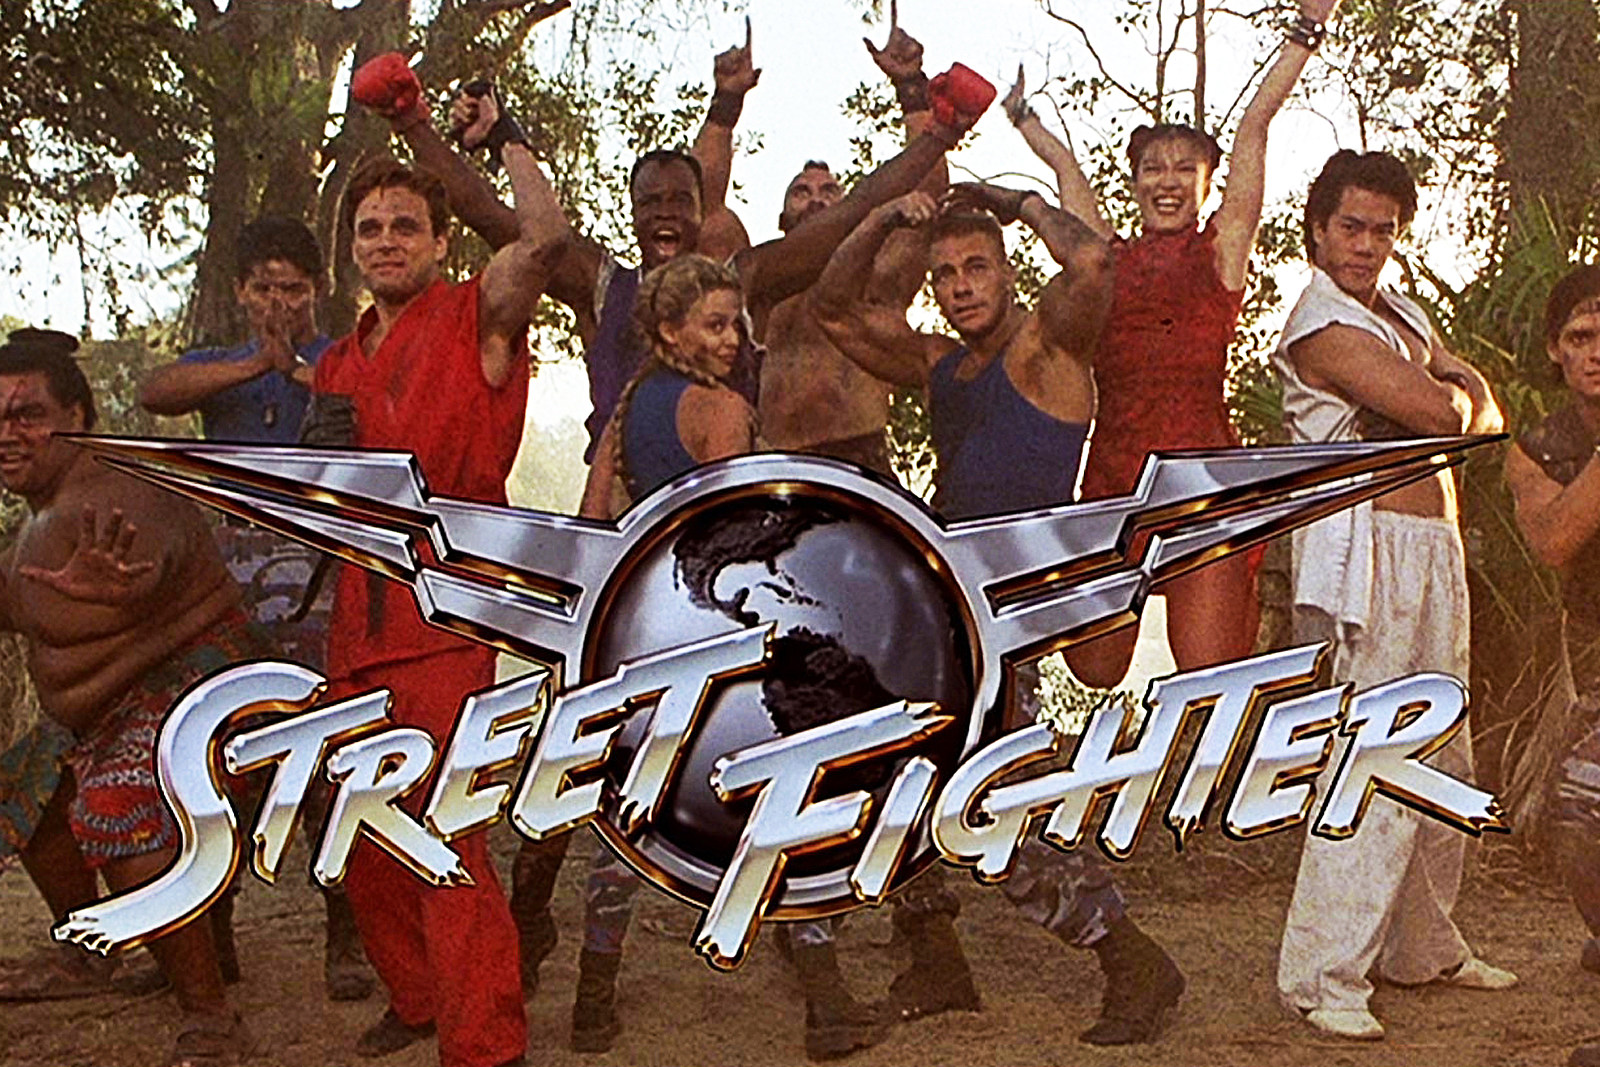 New ‘Street Fighter’ Movie Finds Its Directors